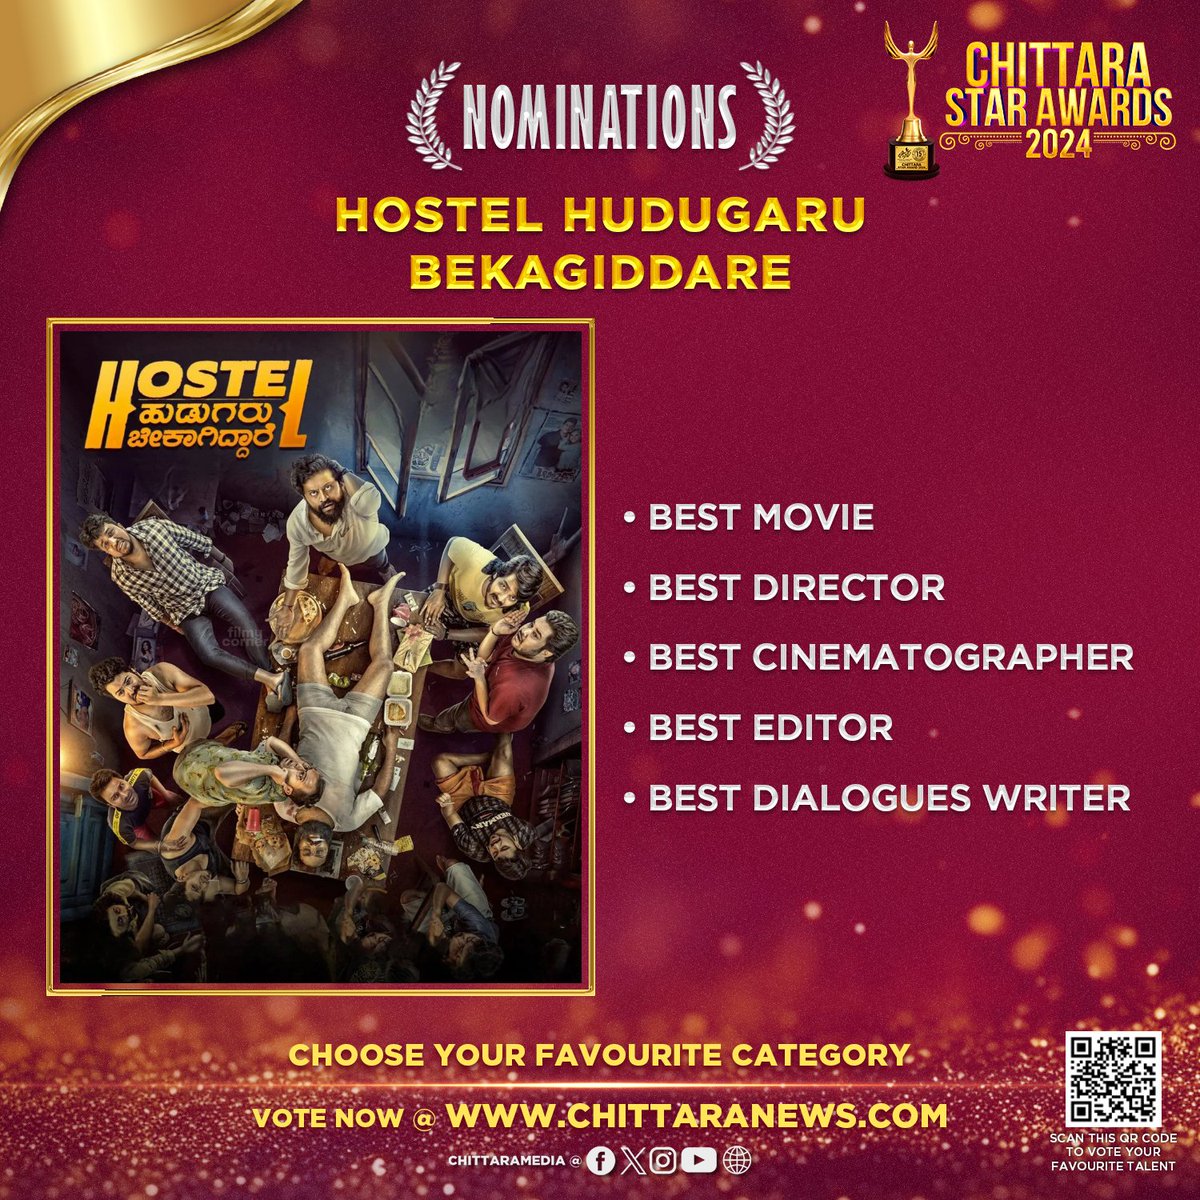 #HostelHudugaruBekagiddare 5 Nominations at #ChittaraStarAwards2024 Global Voting is Now Live : awards.chittaranews.com/poll/780/ Vote now and show your love for Team #HostelHudugaruBekagiddare #ChittaraStarAwards2024 #CSA2024